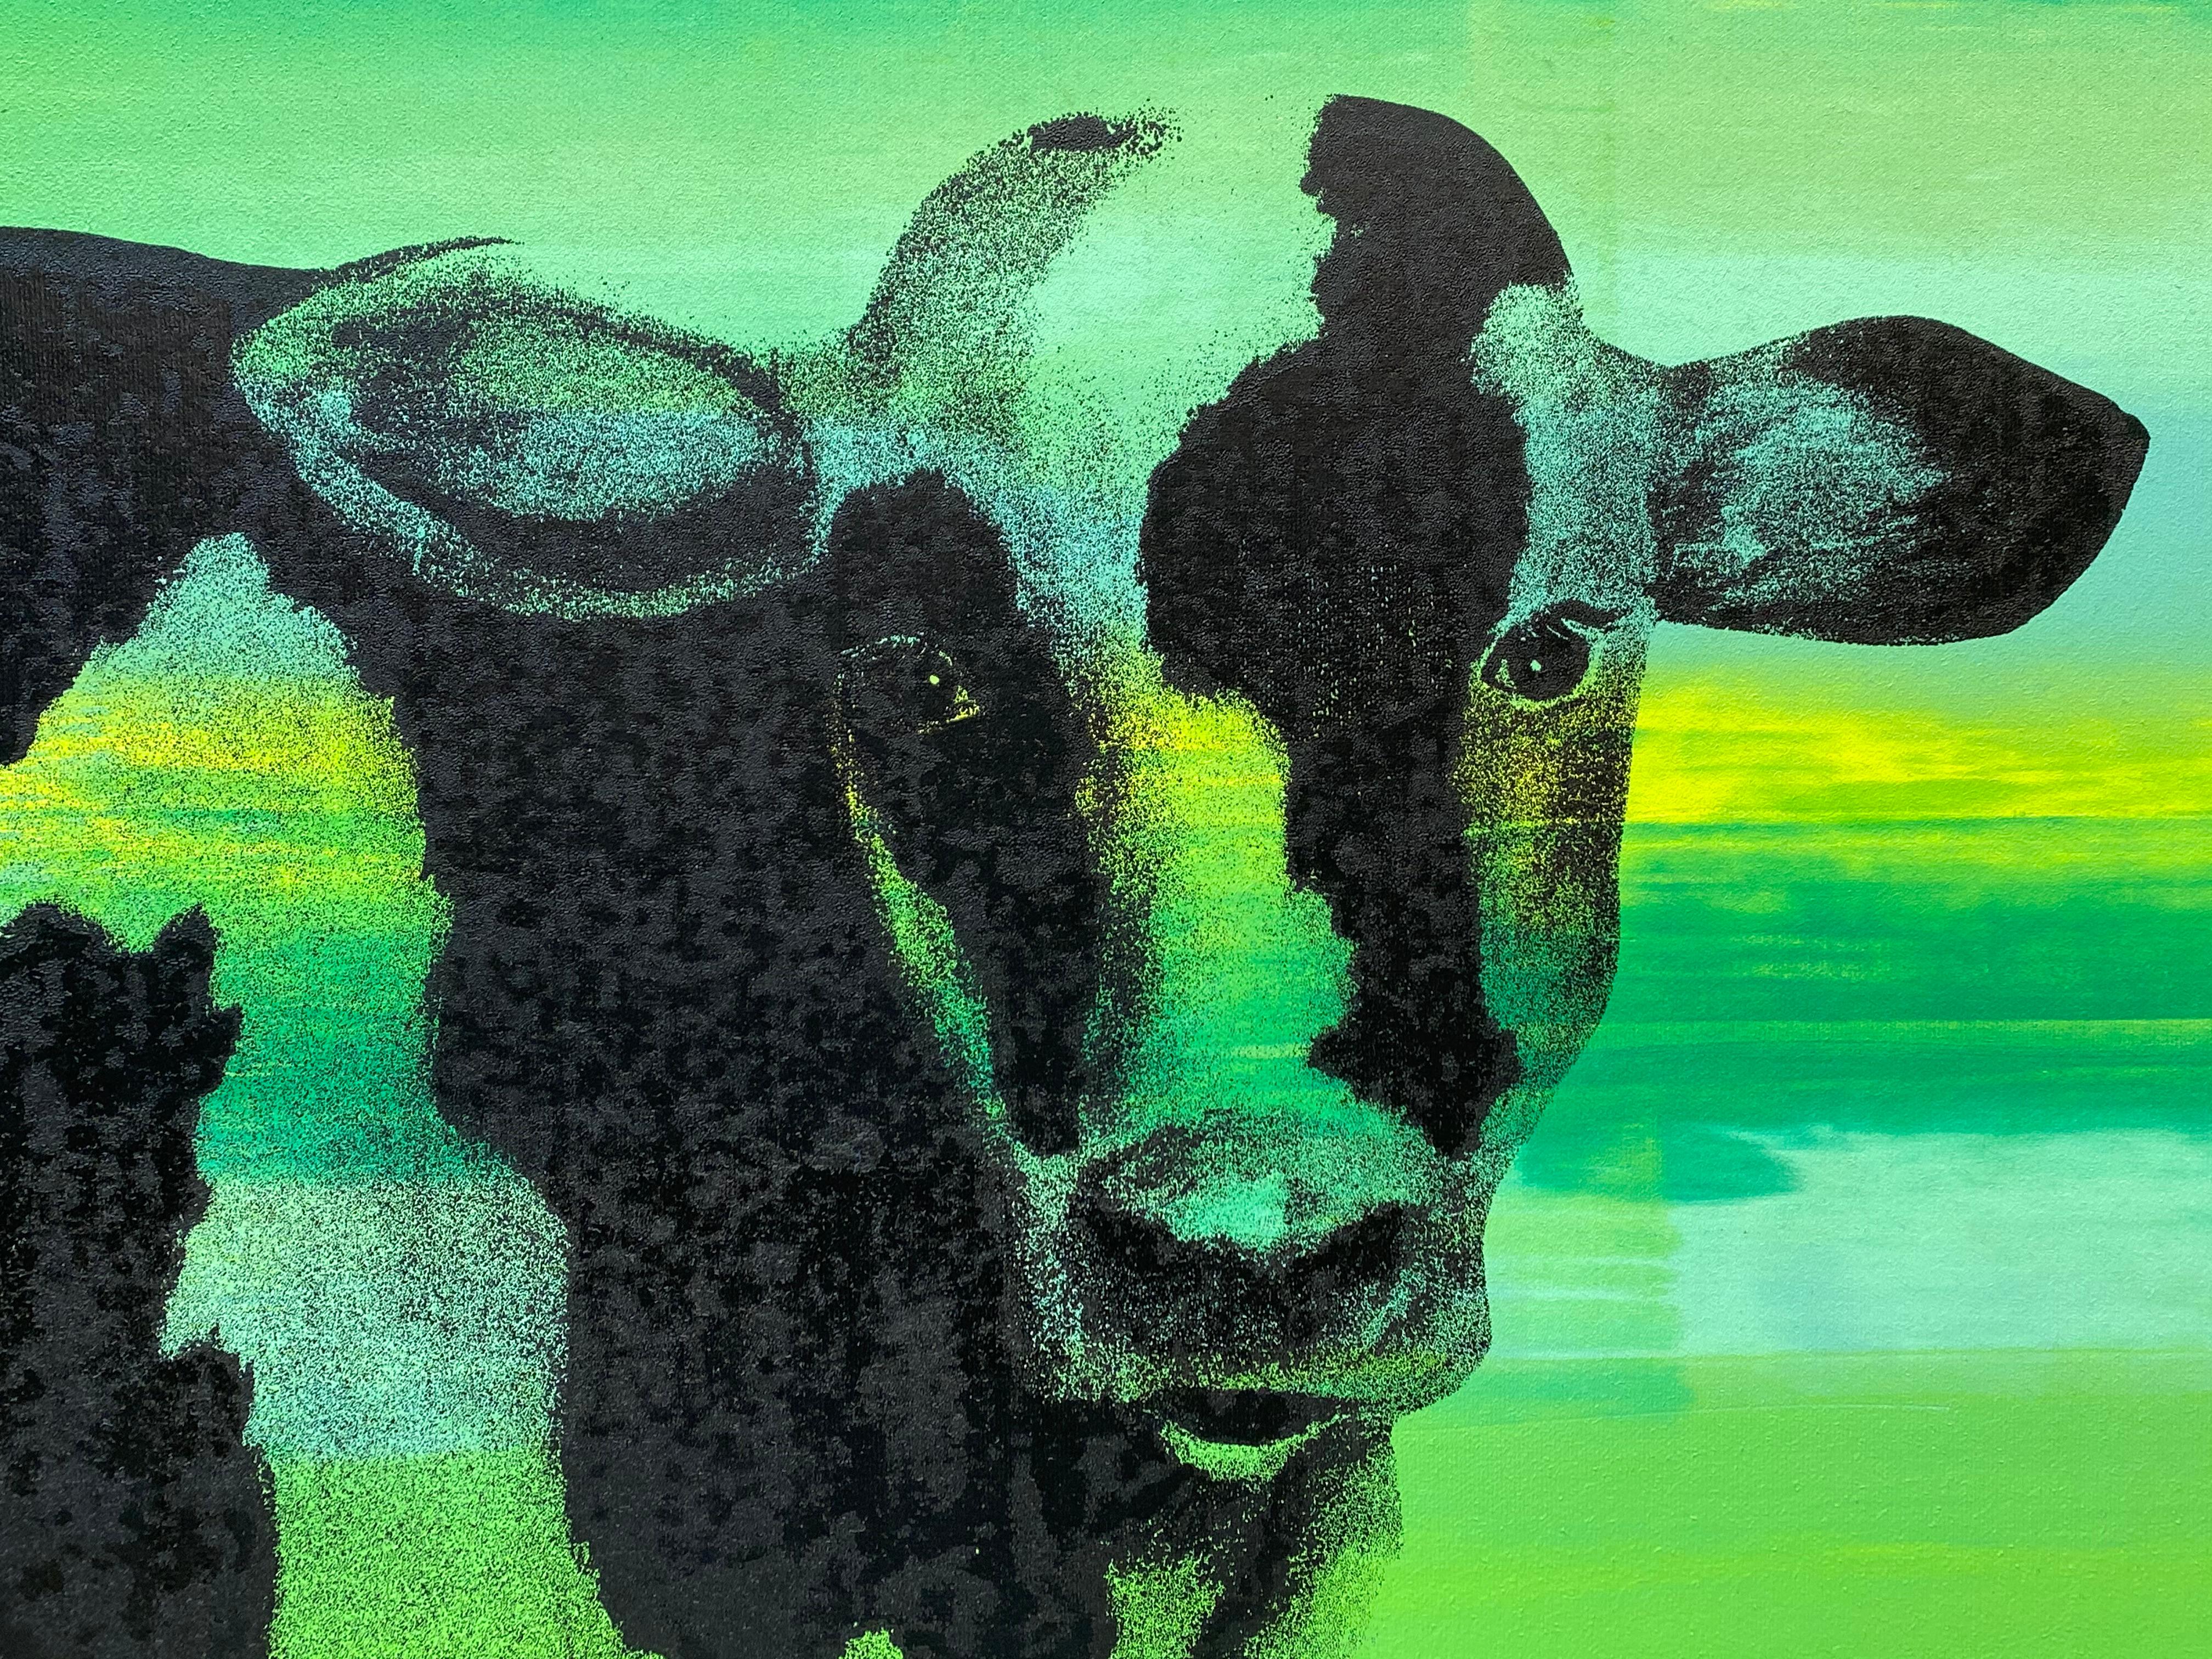 21st Century Large Scale Pop Art Painting on Canvas With Cows - Green Abstract Painting by Unknown